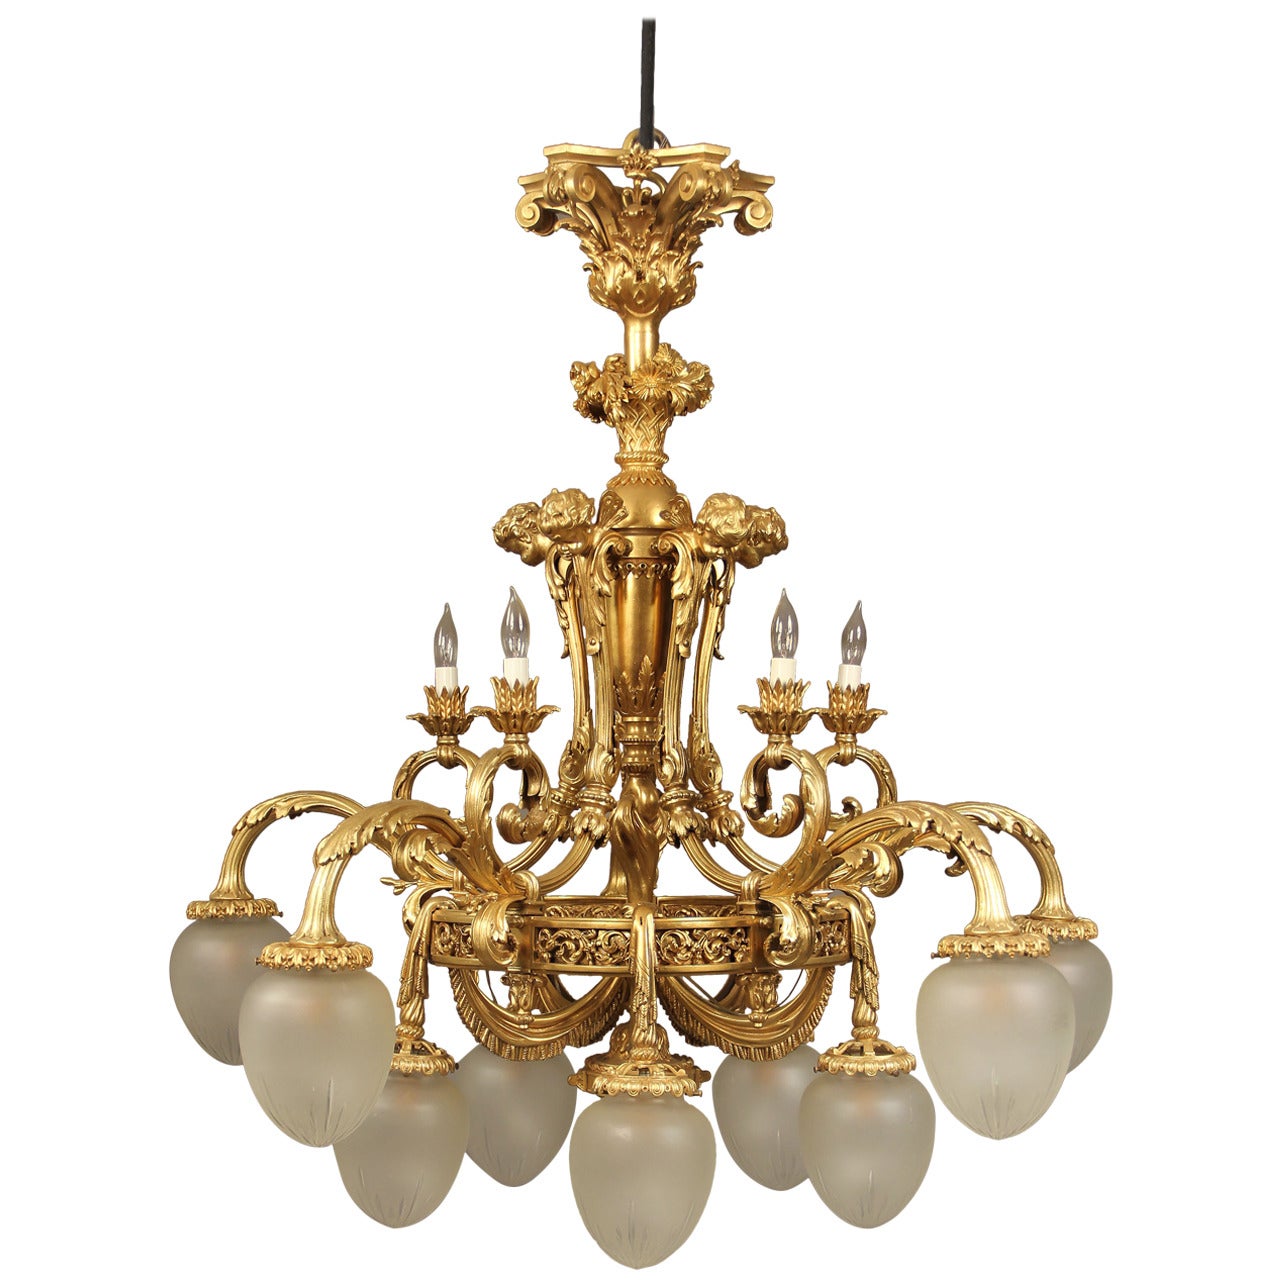 Unusual and Great Quality Early 20th Century Gilt Bronze Chandelier